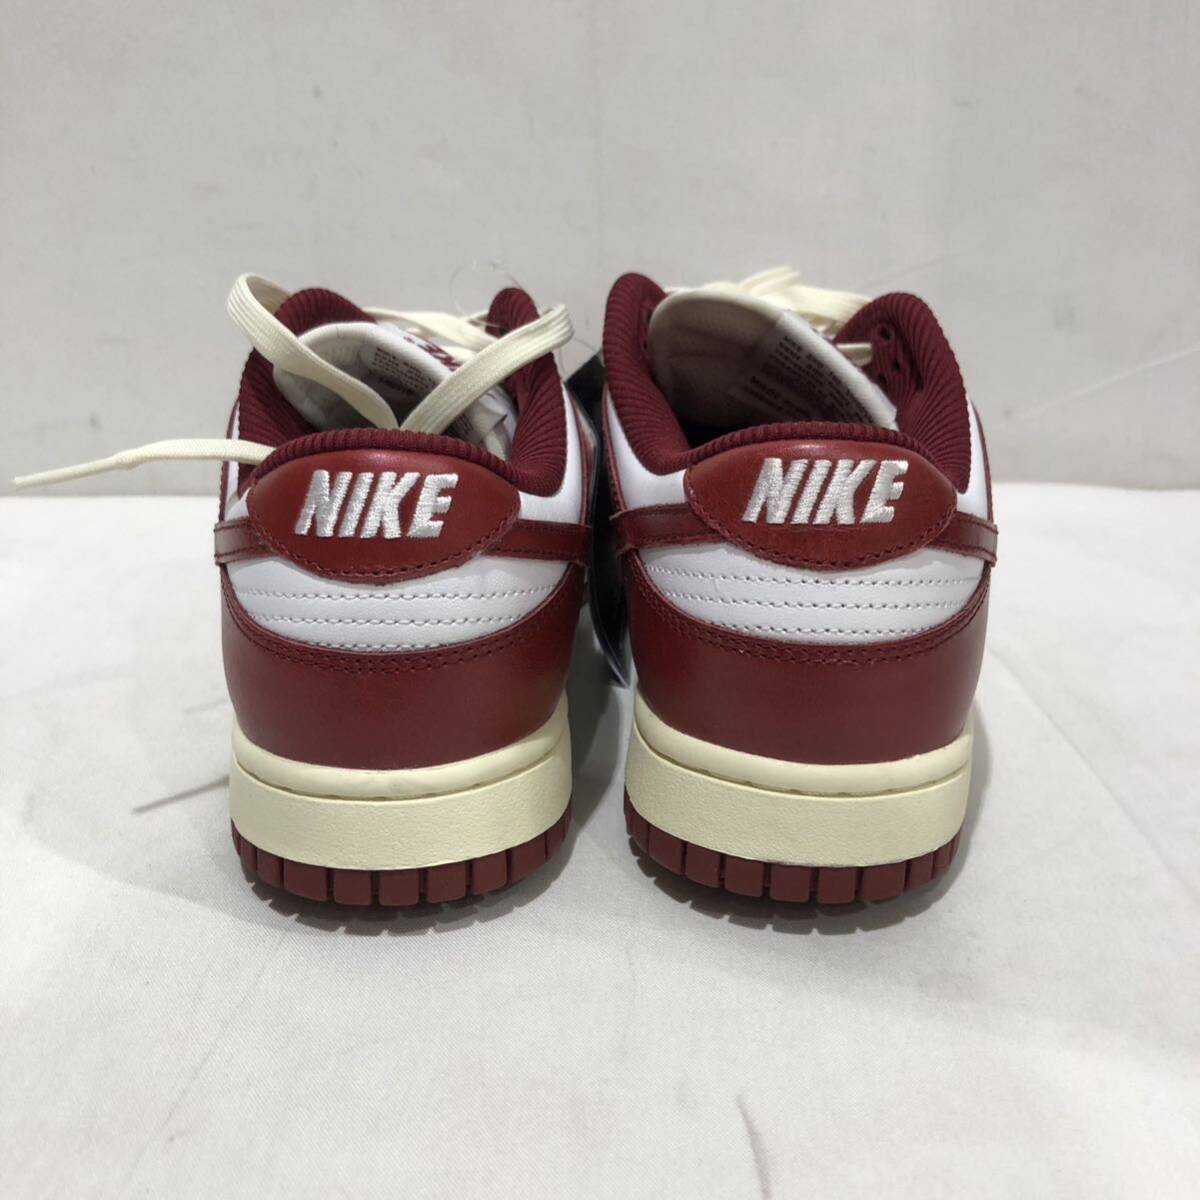 【NIKE】WMNS Dunk Low PRM Team Red and White ナイキ 26cm RED ローカットスニーカー FJ4555-100 ts202405_画像3